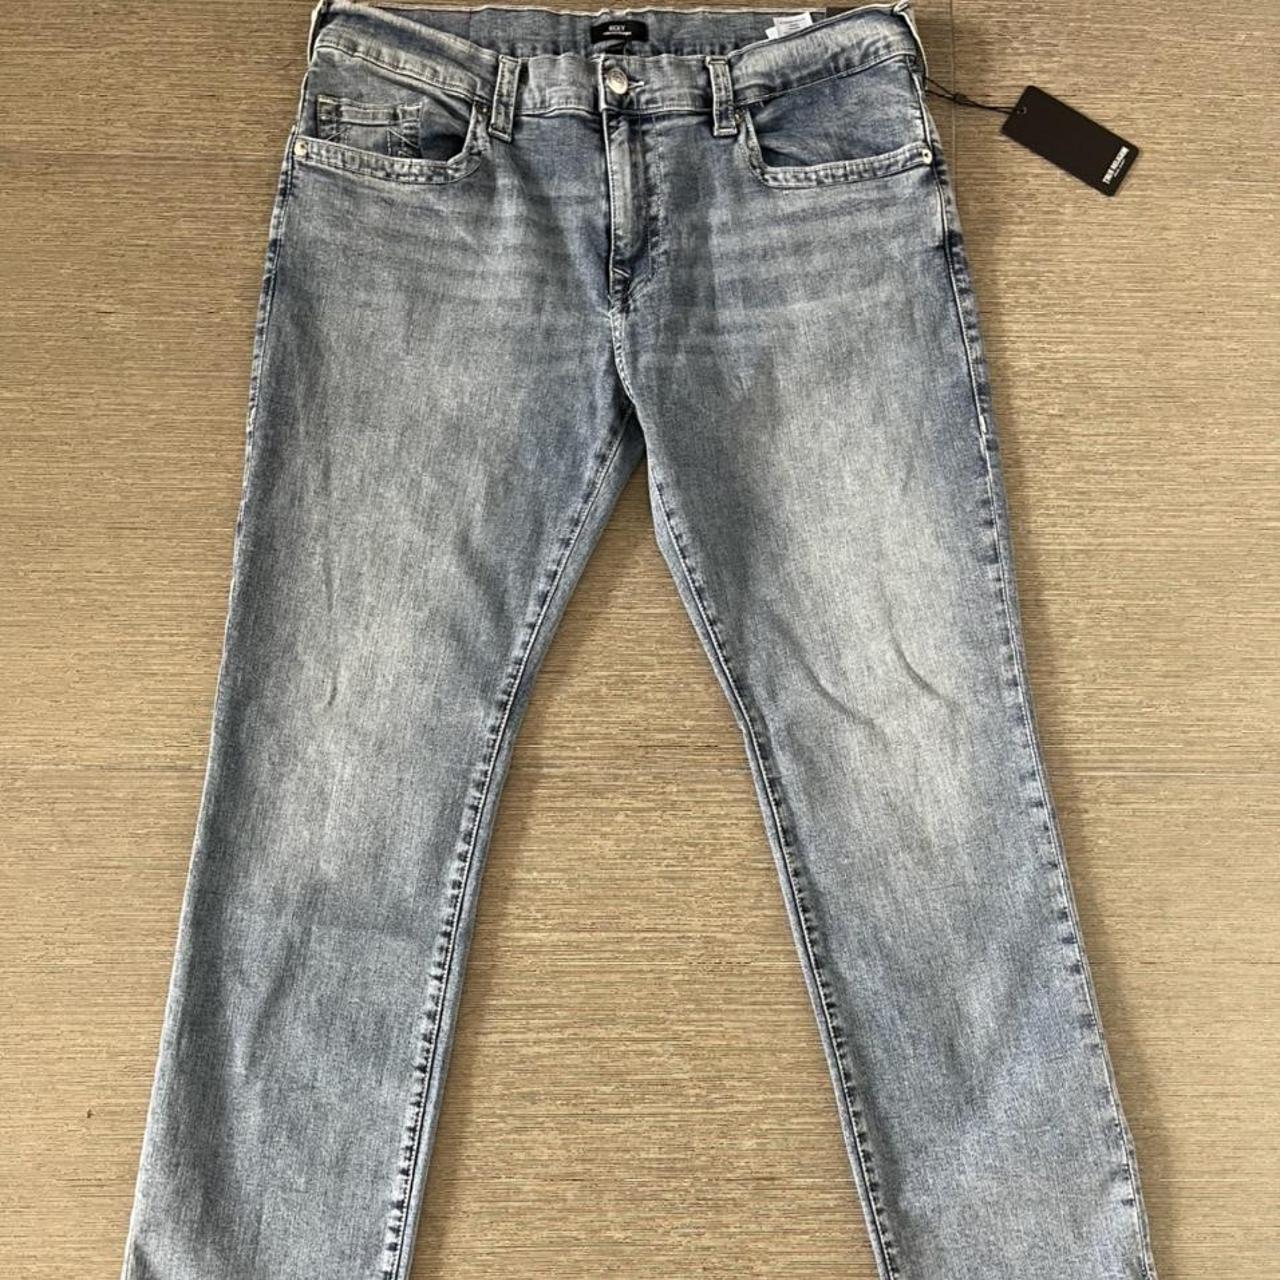 Jeans are like new with the tag still attached Fits... - Depop